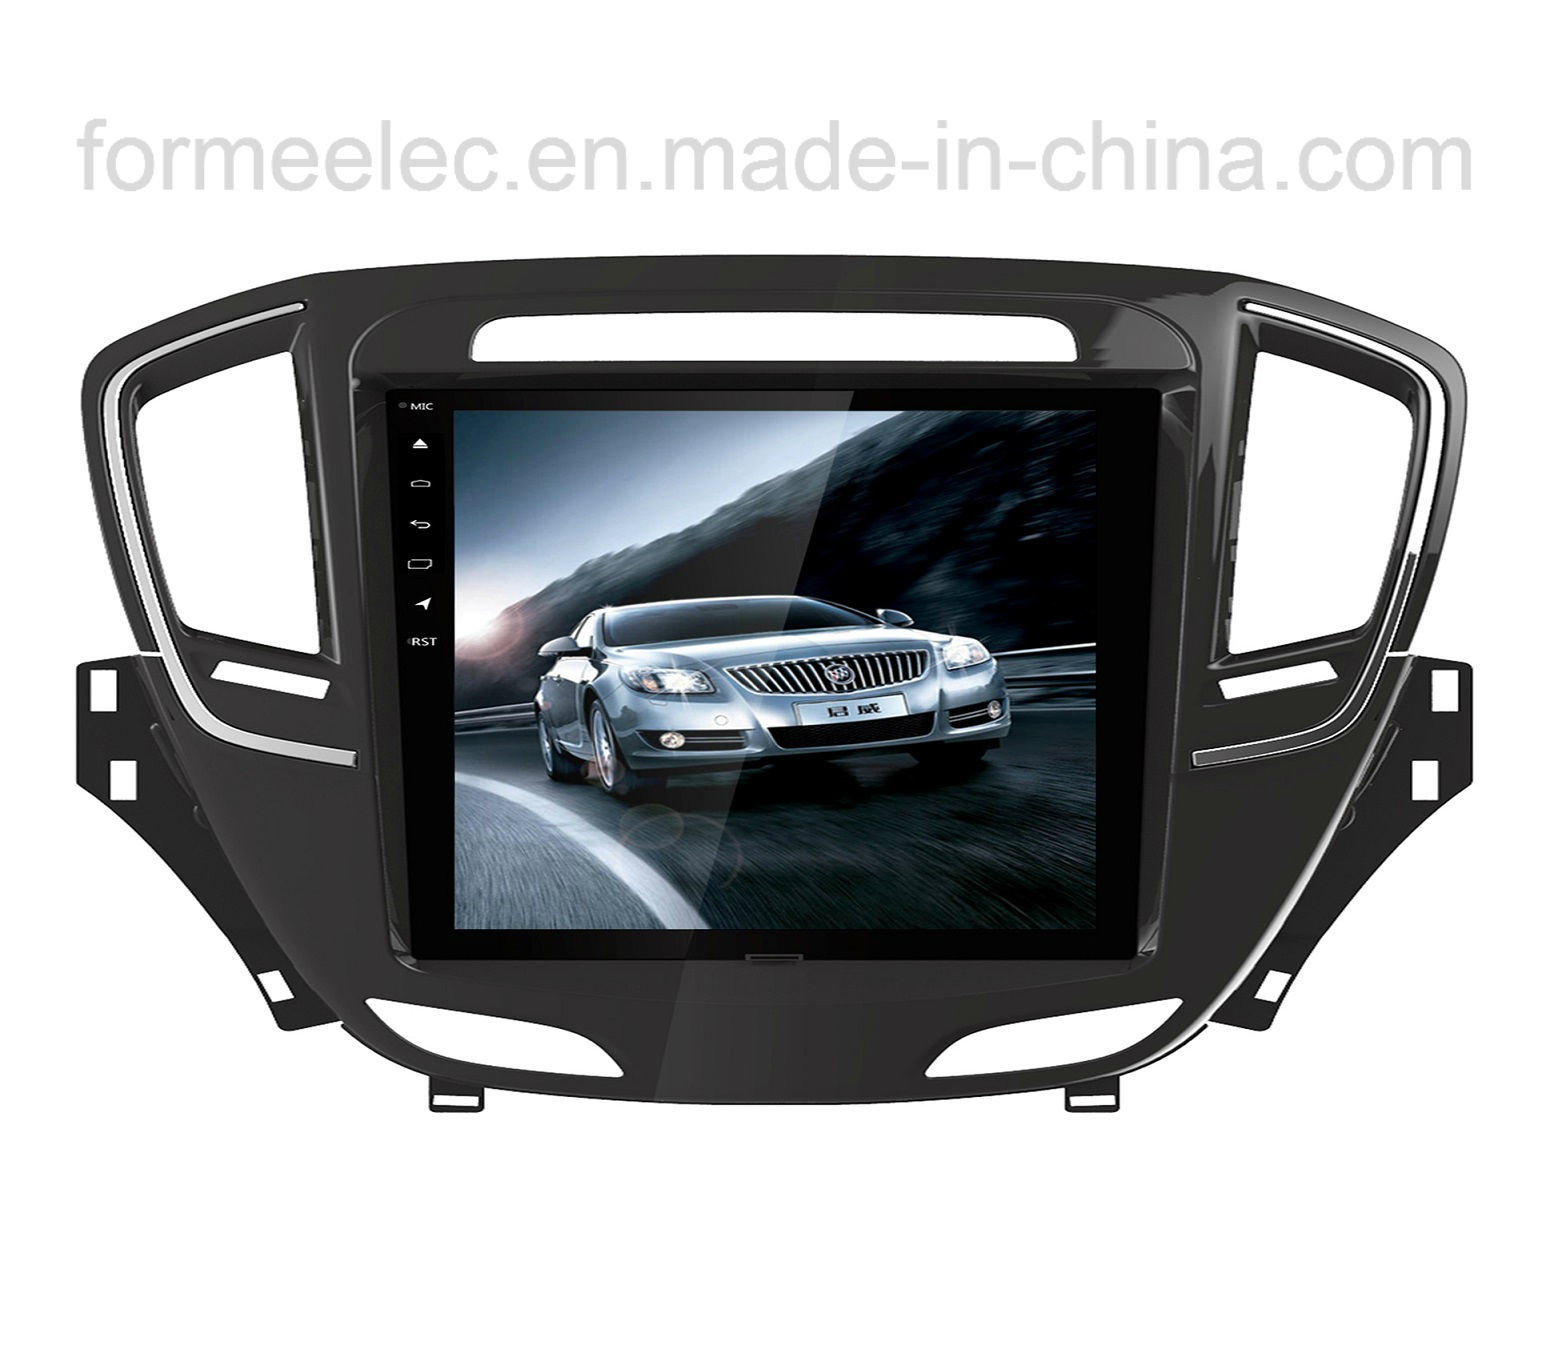 10.1 Inch Car DVD Player for Buick Regal